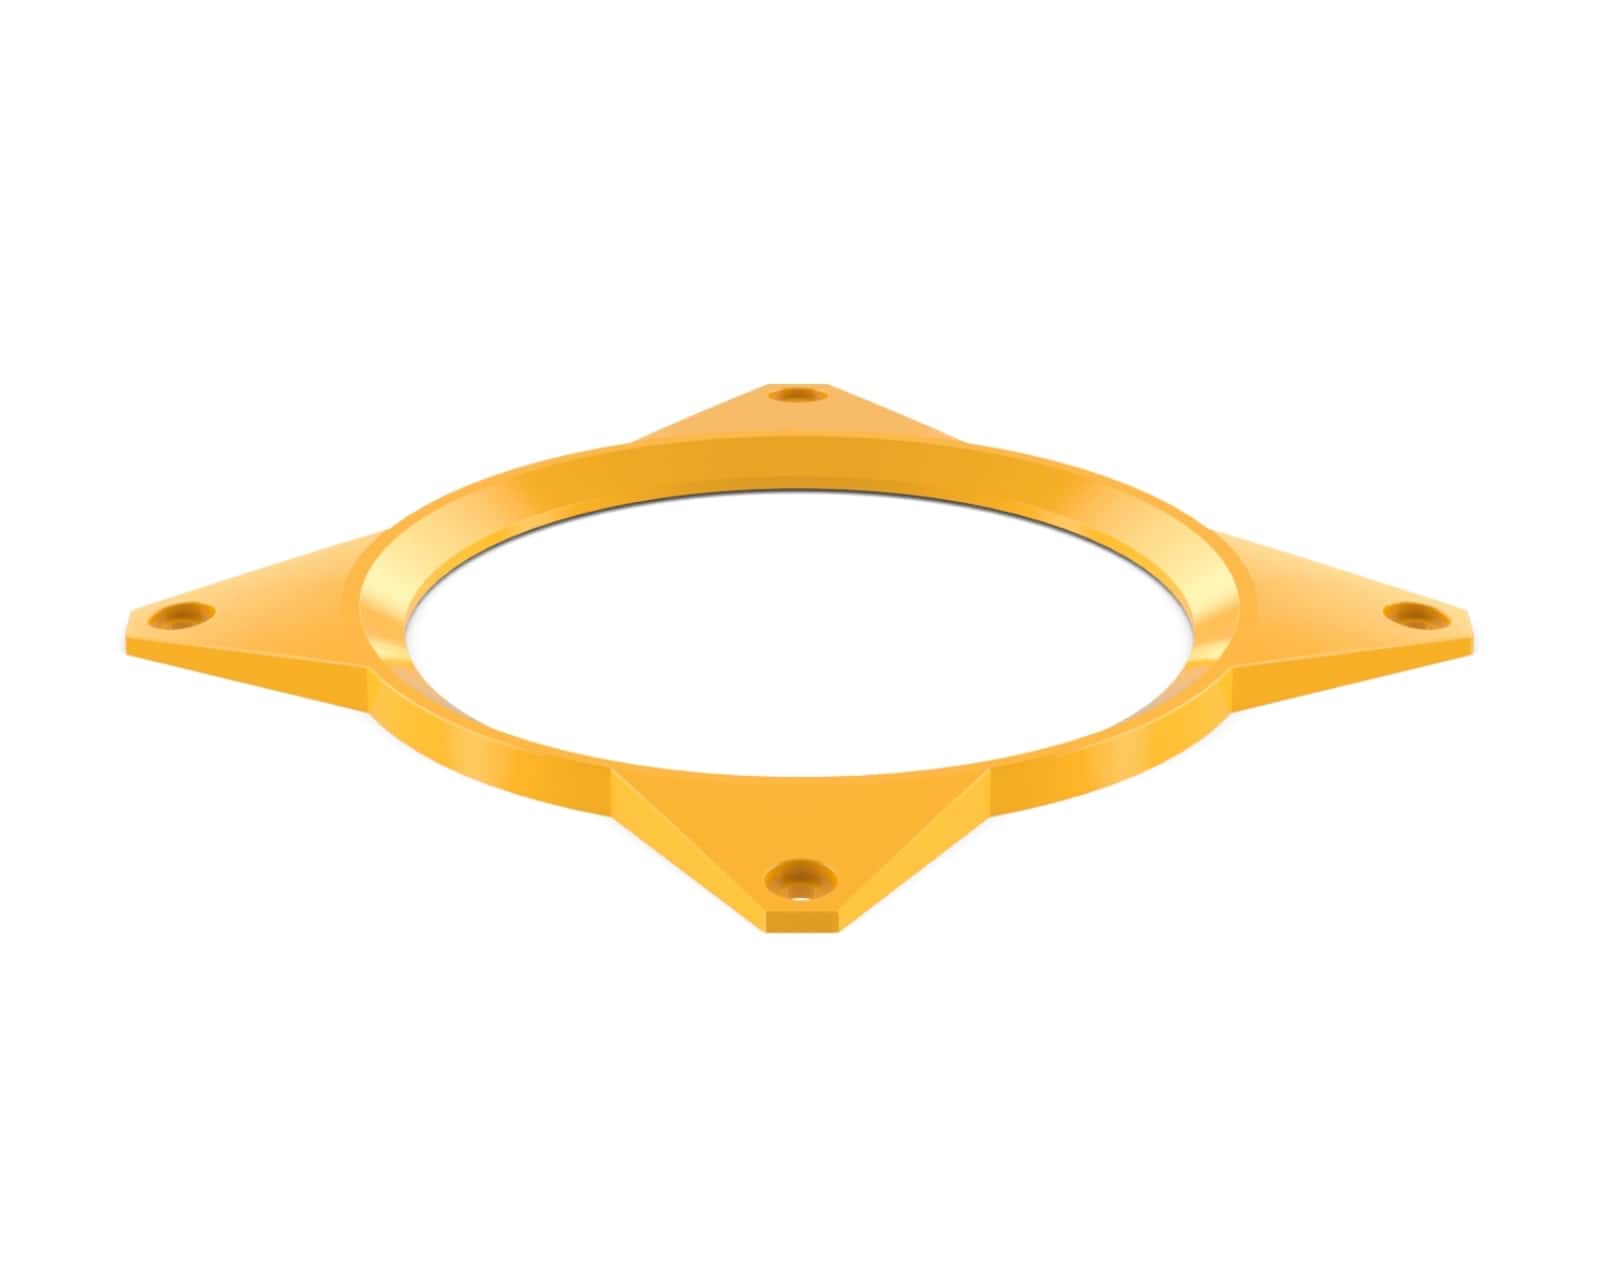 PrimoChill 120mm Aluminum SX Fan Cover - PrimoChill - KEEPING IT COOL Yellow